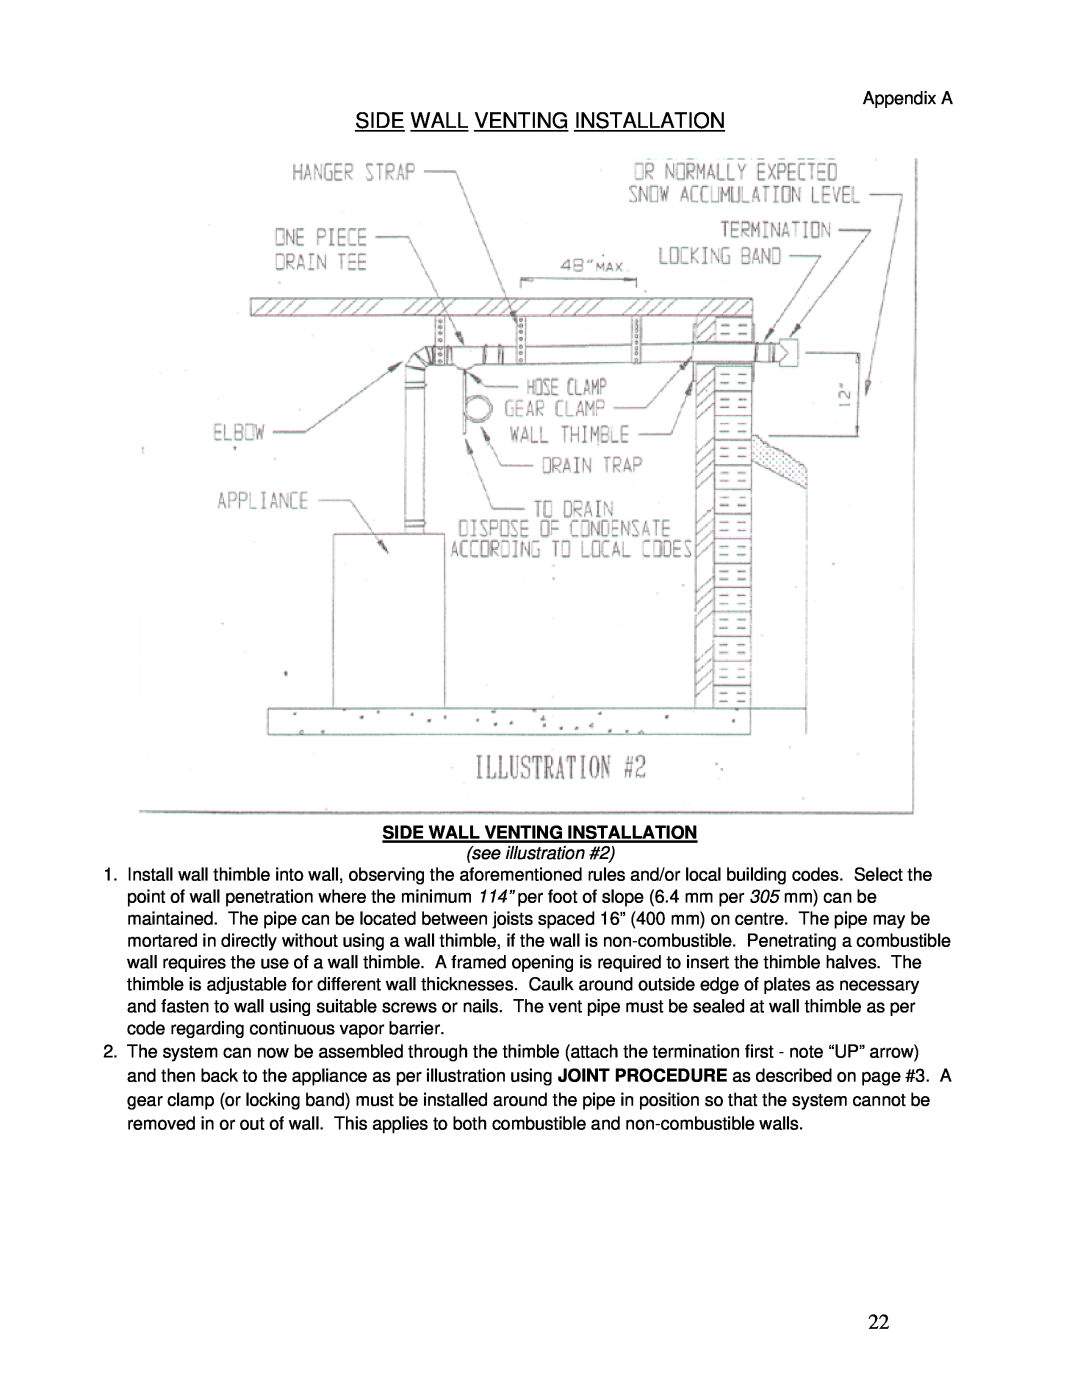 Vanguard Heating PM200, PM400 operation manual Side Wall Venting Installation, see illustration #2 